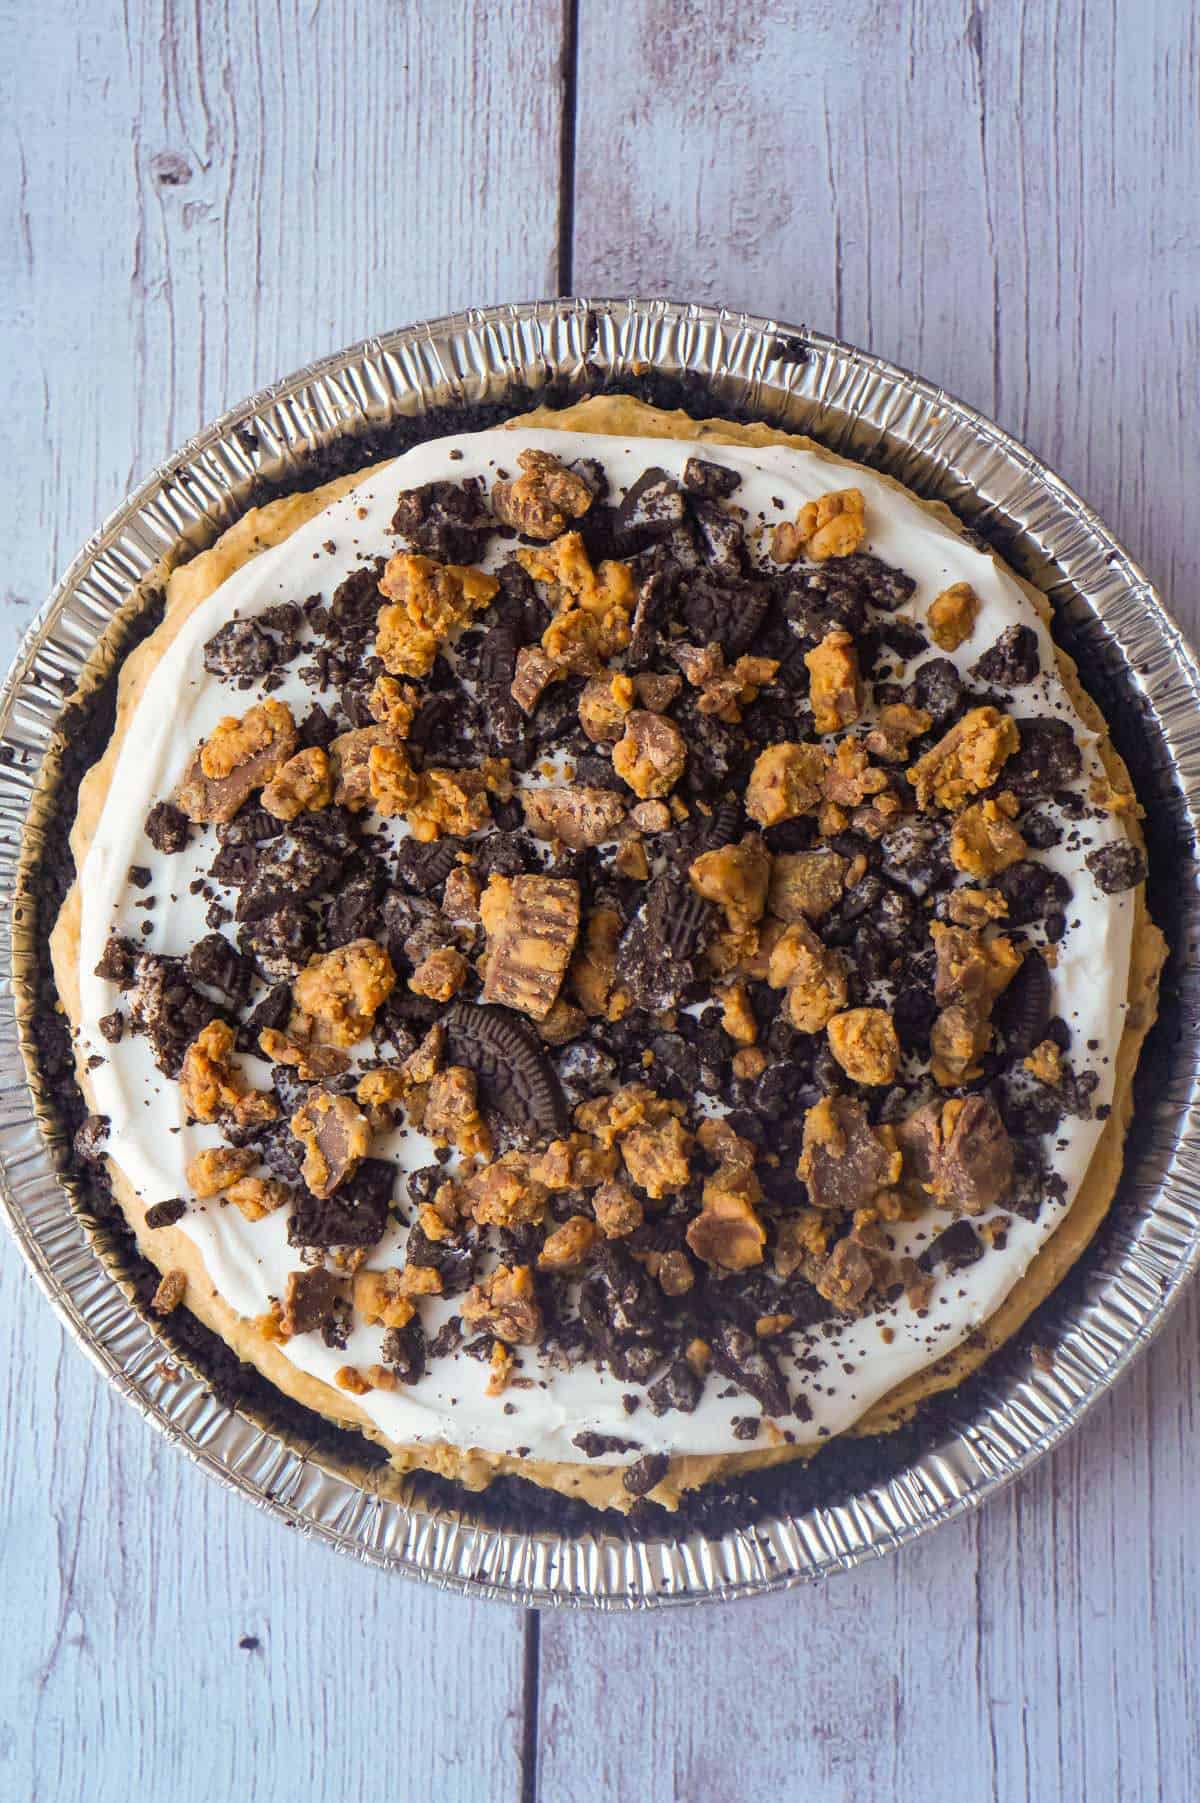 No Bake Oreo Peanut Butter Cup Cheesecake is a quick and easy dessert recipe perfect for any occasion. An Oreo cookie pie crust is filled with a delicious peanut butter and cream cheese mixture loaded with pieces of Reese's Peanut Butter Cups and Oreo cookies. This chocolate peanut butter dessert is perfect for summer.